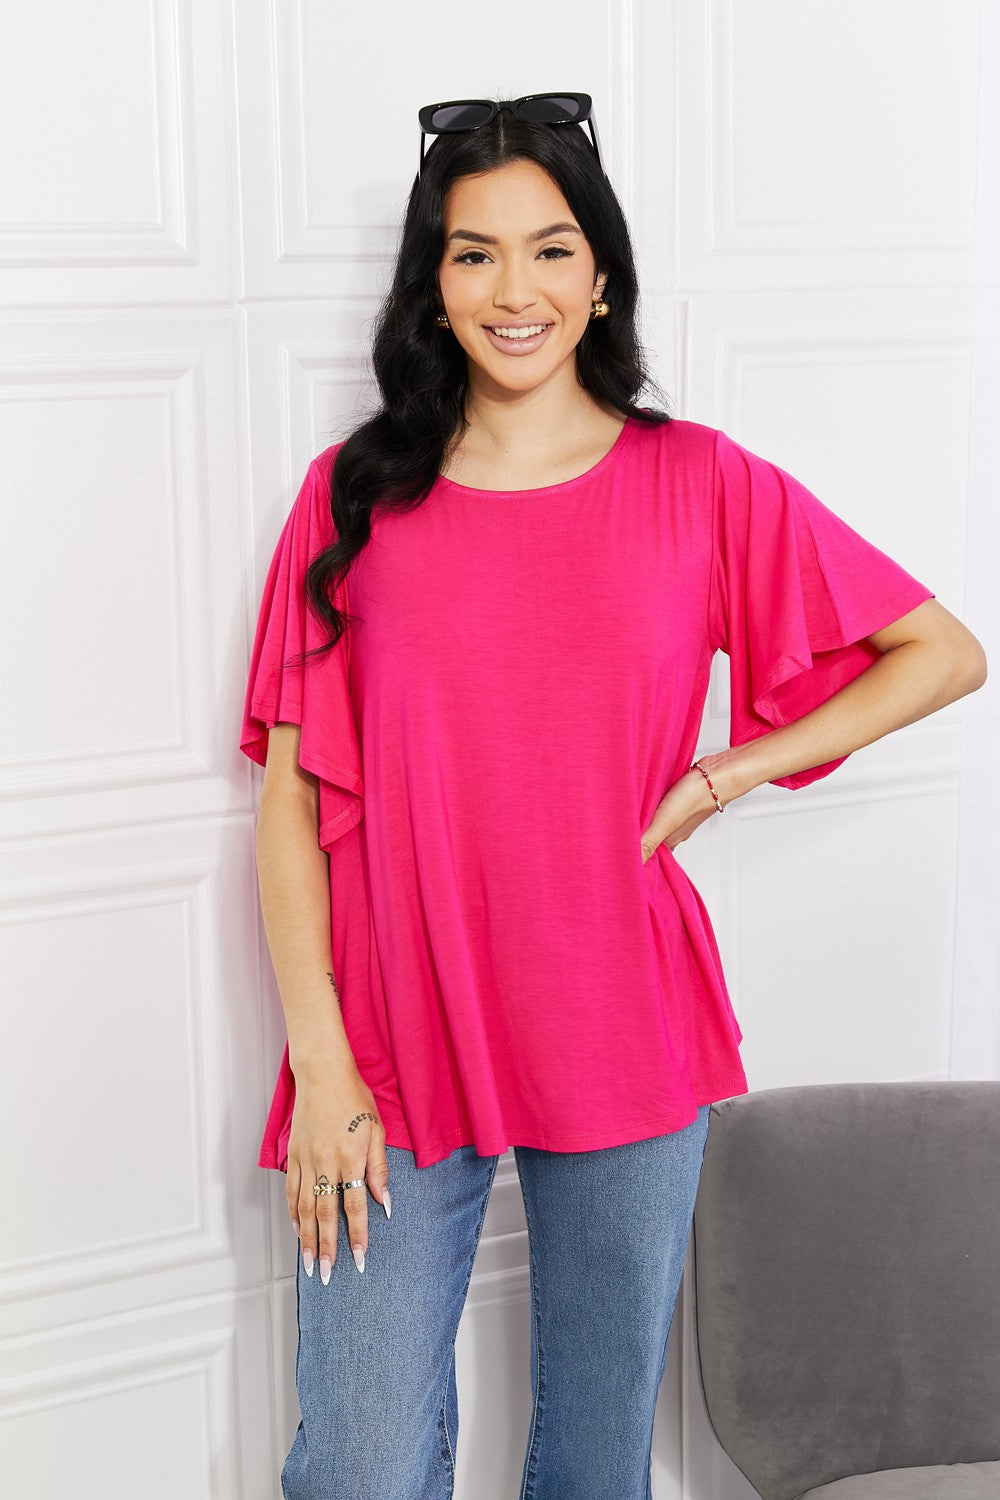 Yelete More Than Words Flutter Sleeve Top